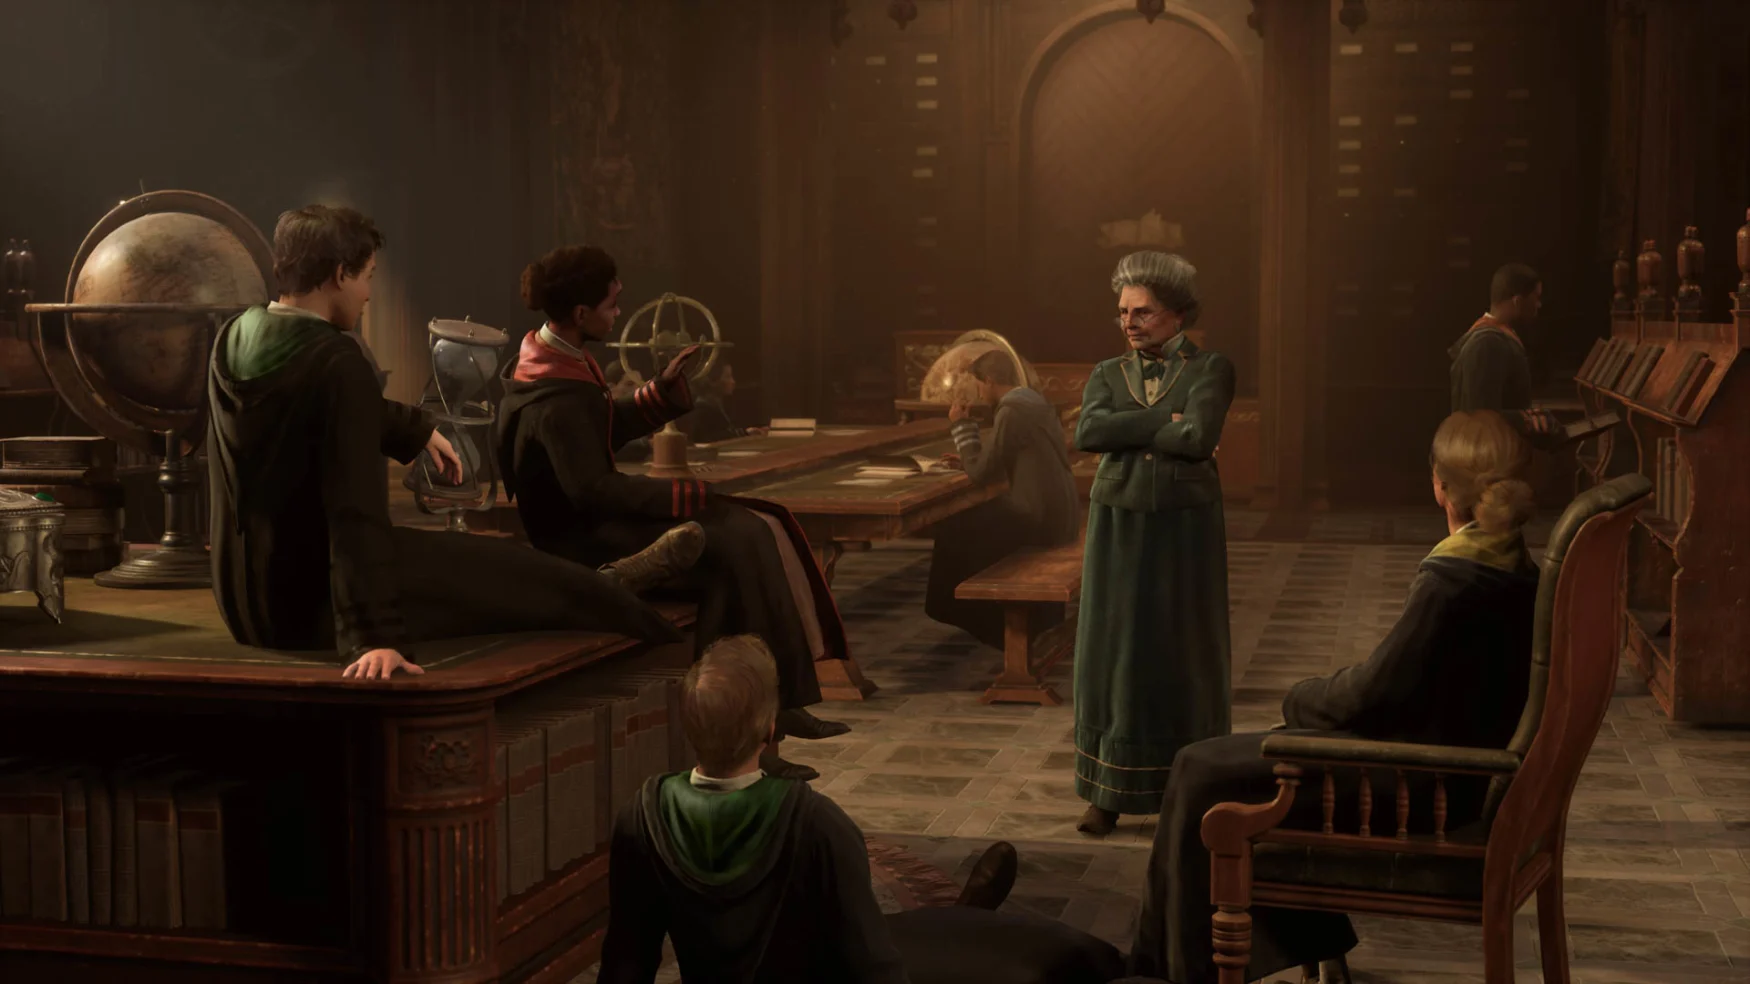 Hogwarts Legacy review: The Wizarding World game we've always